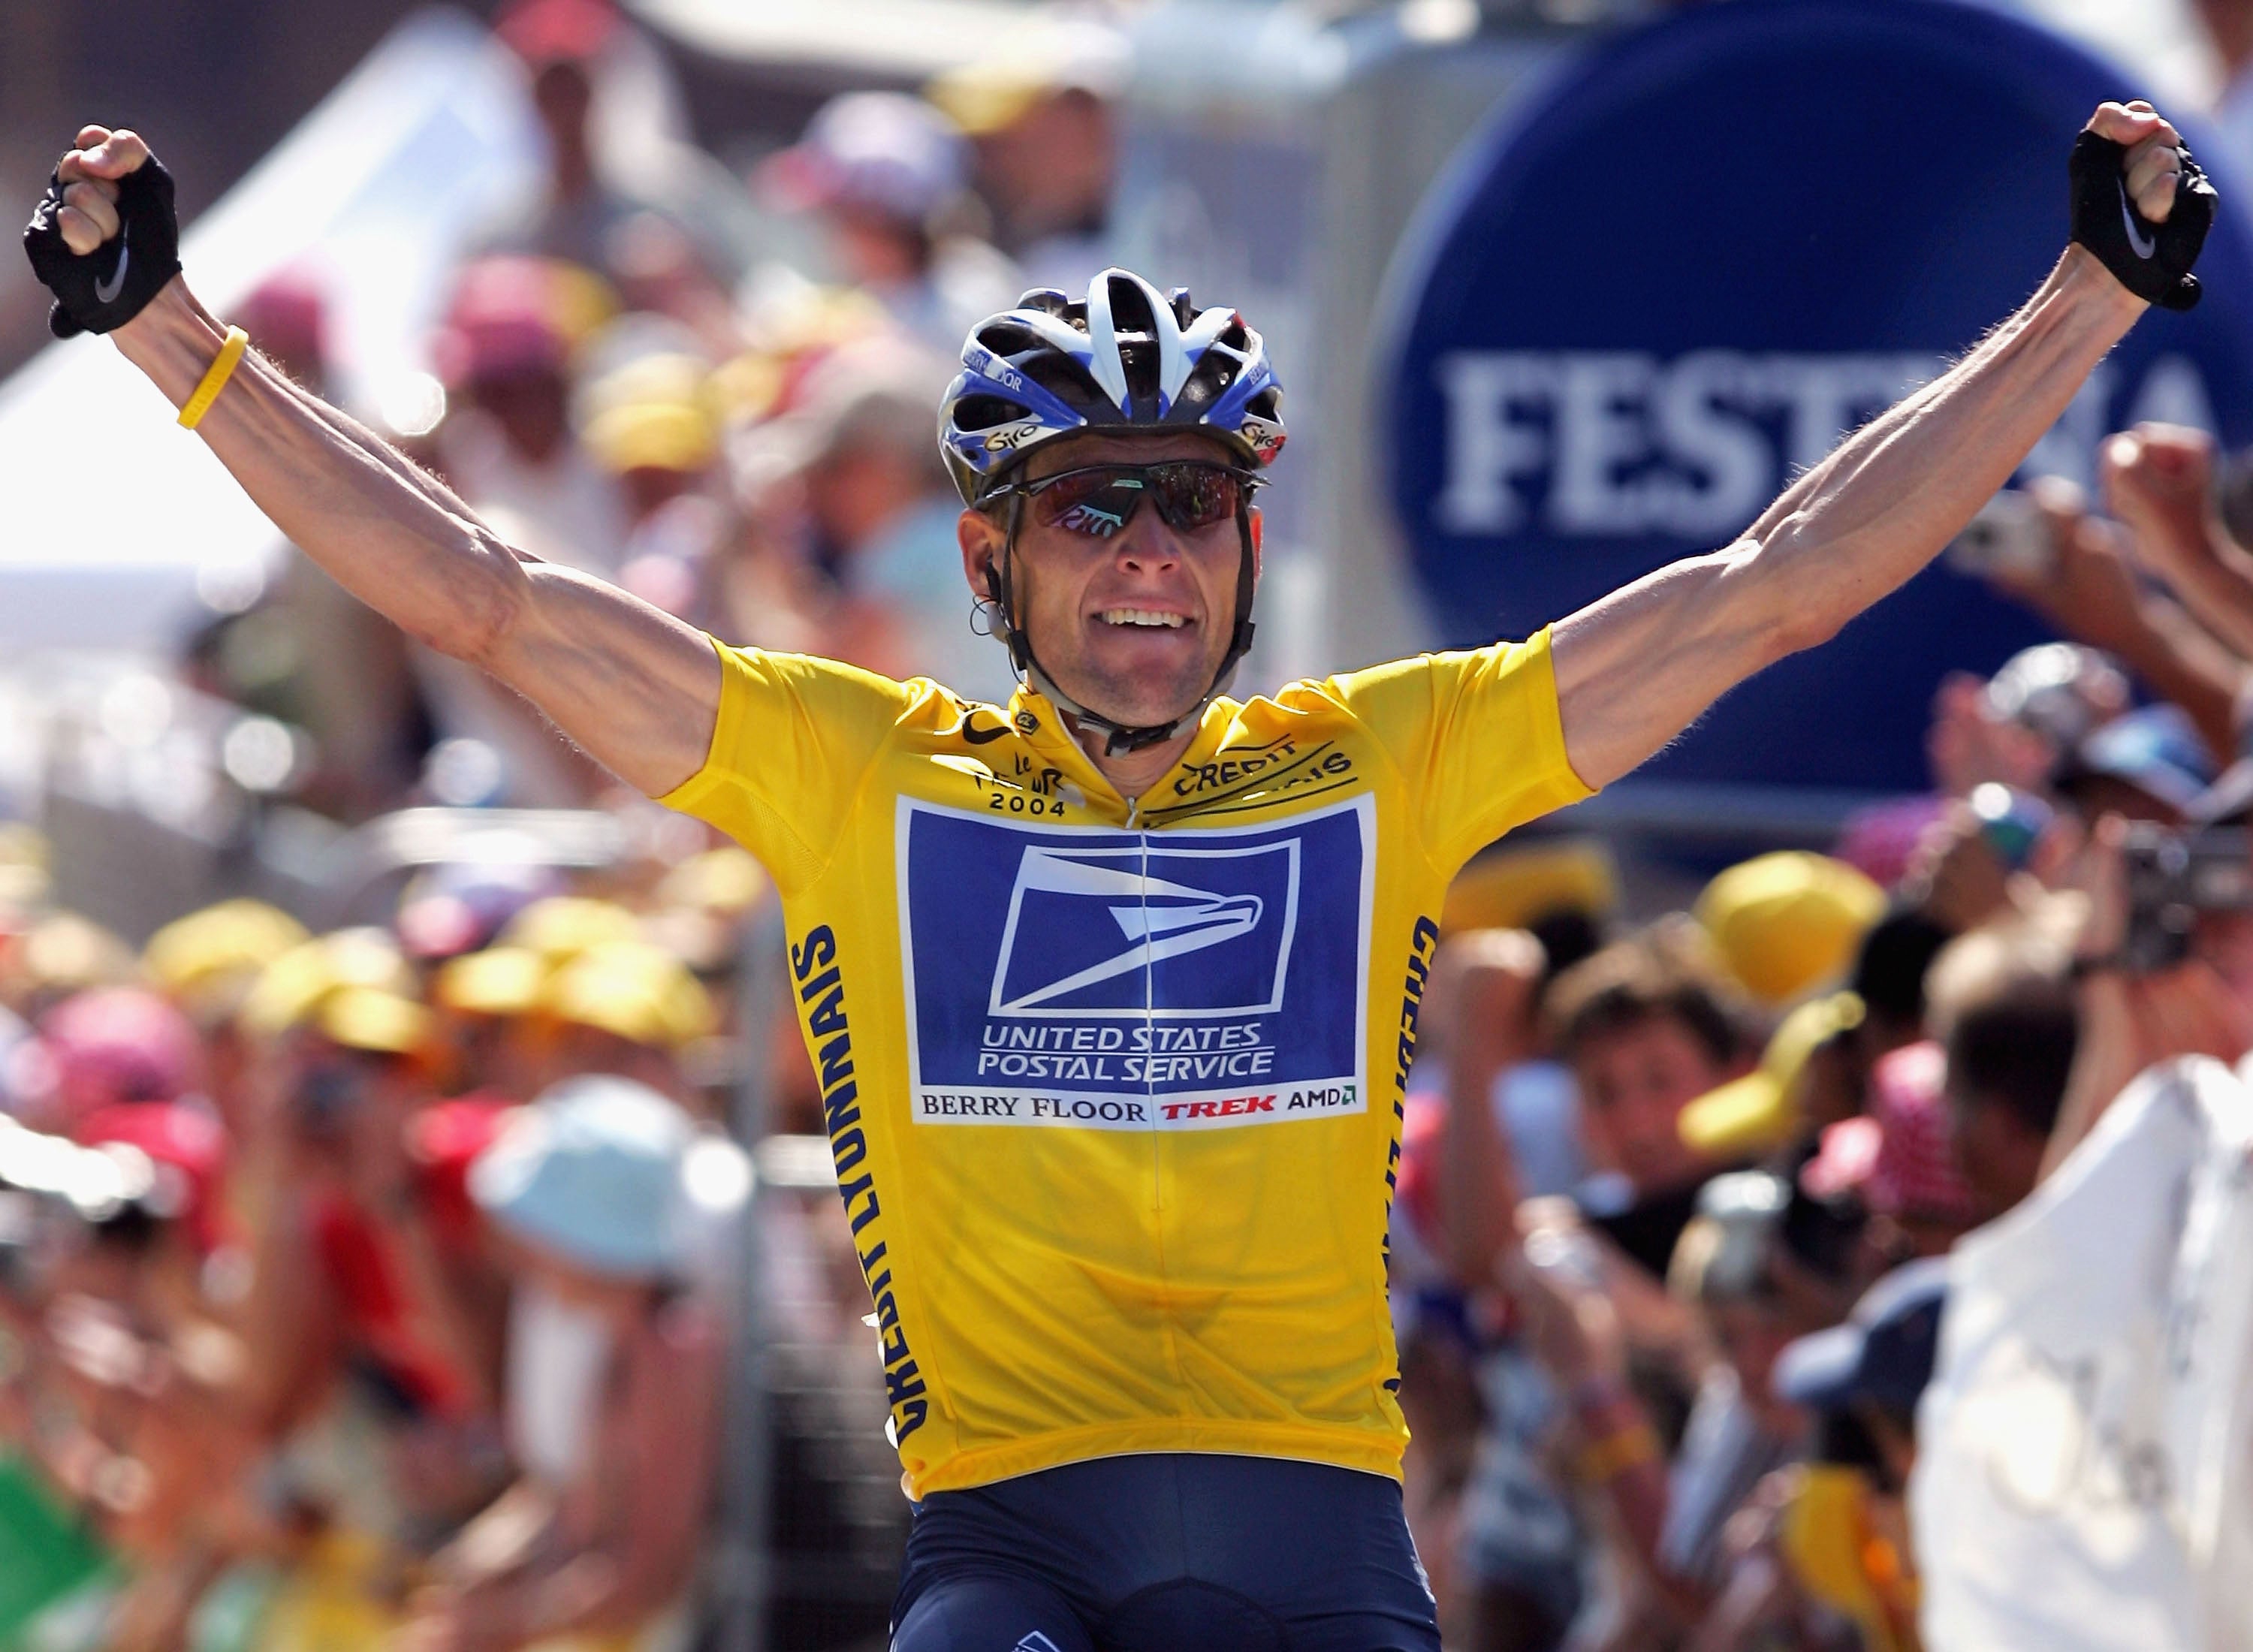 Lance Armstrong won seven Tours de France before later being stripped of his titles